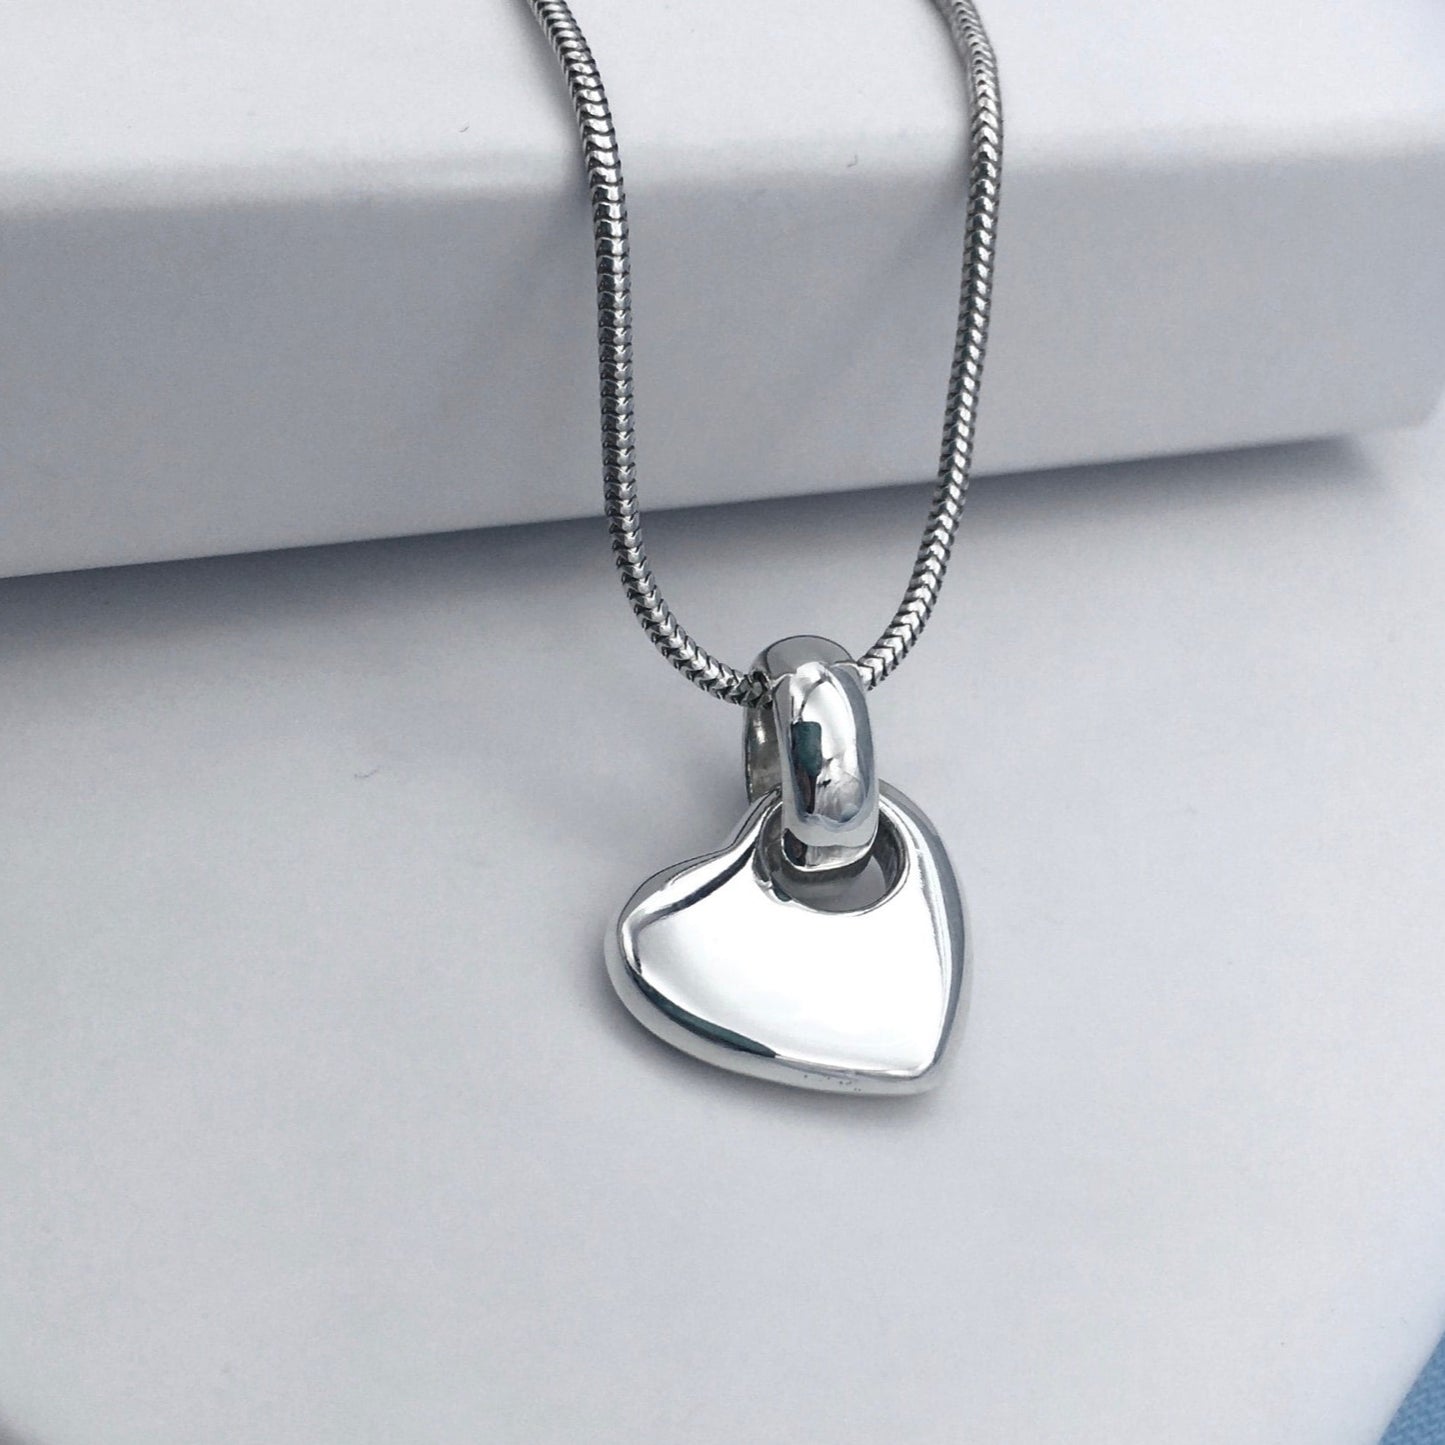 Love Heart Pendant with Engraving Love Heart Charm Personalized Initial Heart Pendant for Necklace Sterling Silver Solid Heart Charm Pendant